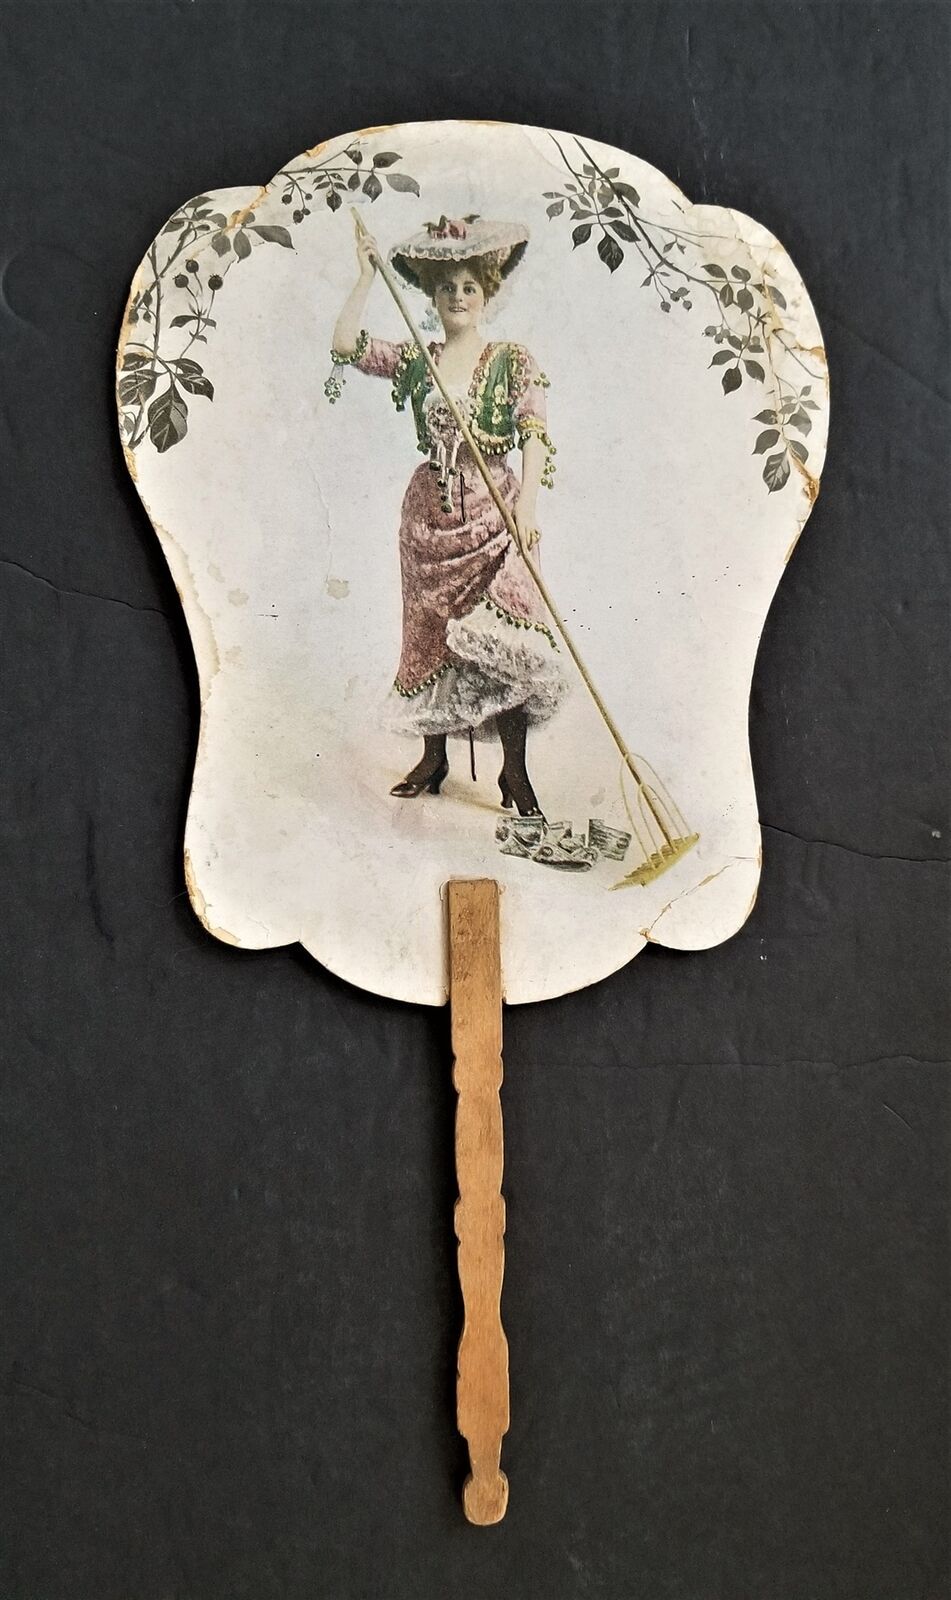 Primary image for 1920s antique COOK & JORDANS mexico ny HAND FAN hats dry goods shoes notions AD